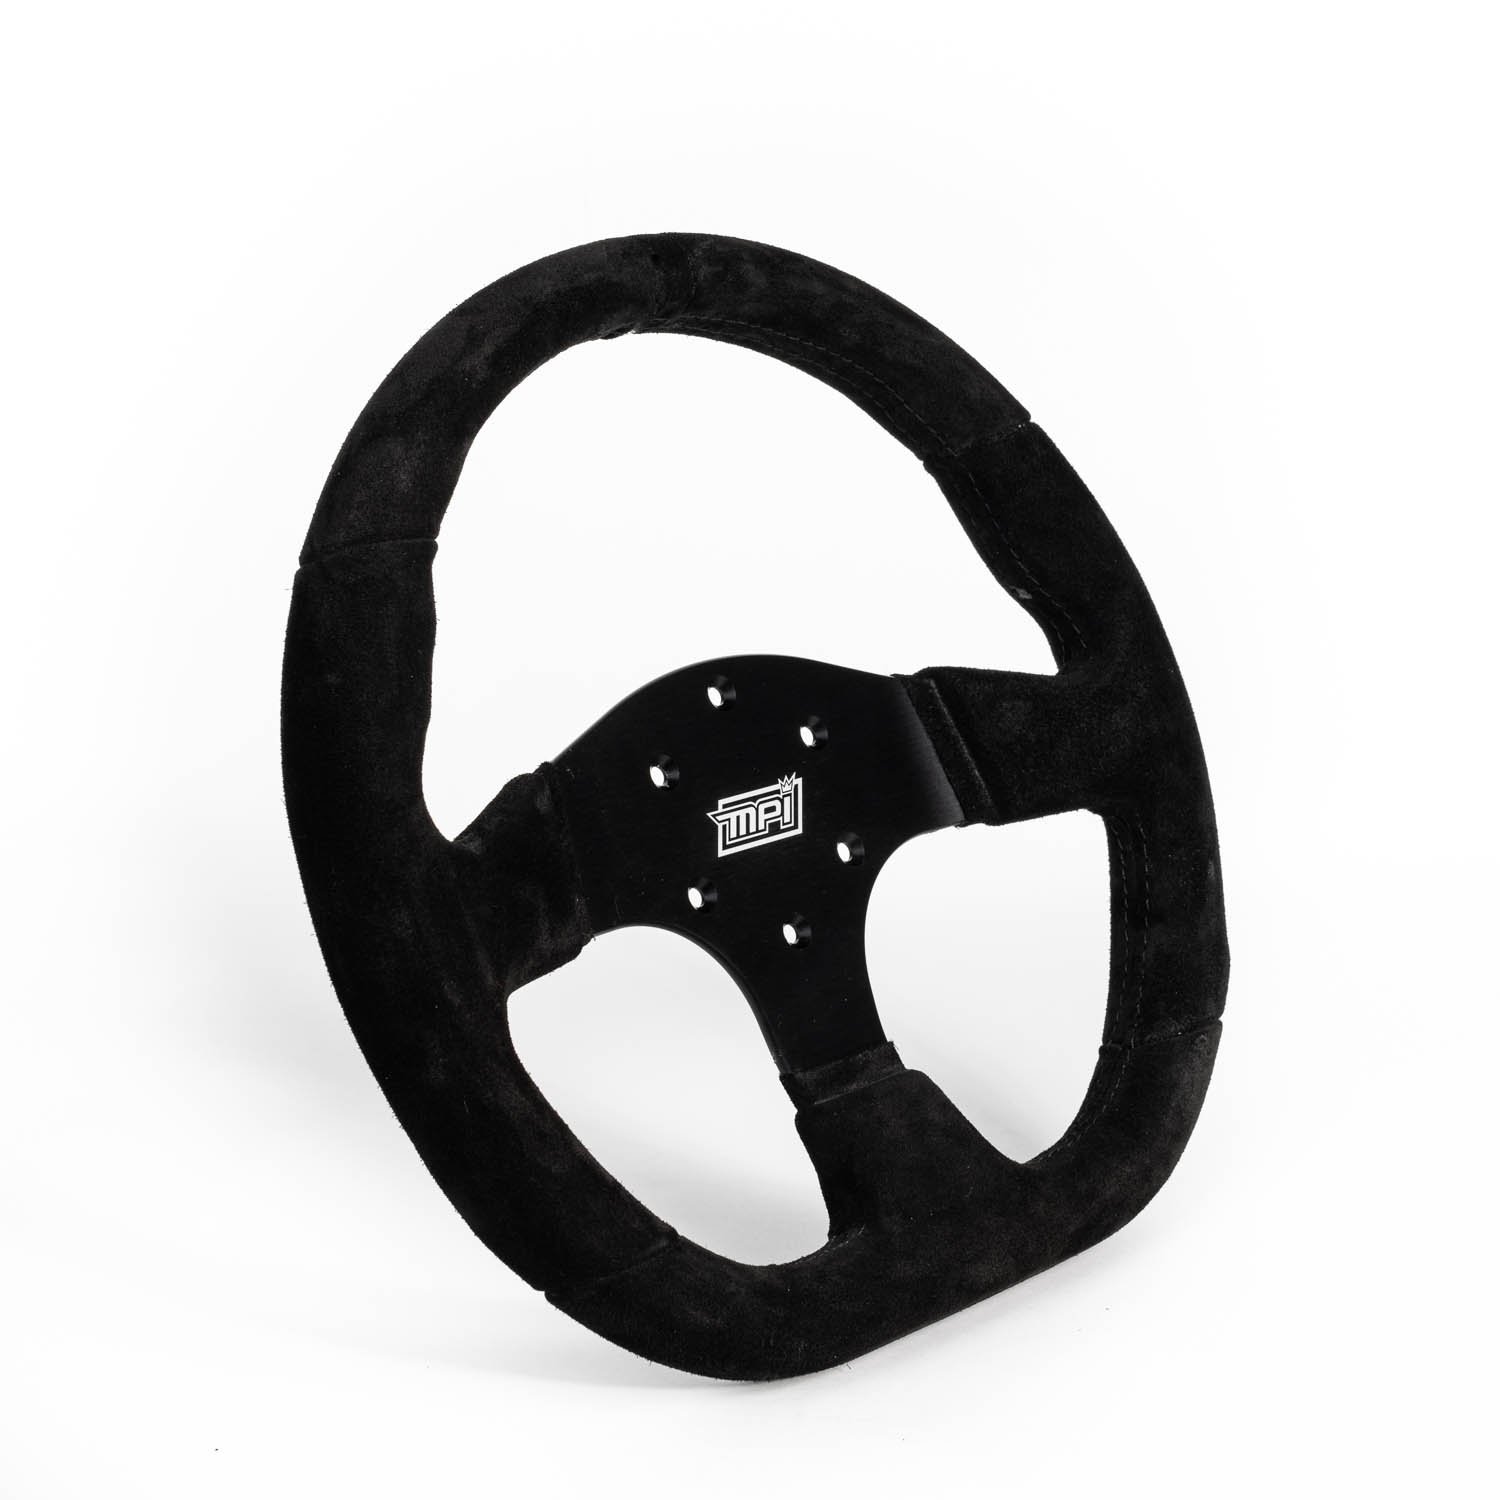 Touring Car/GT/Track Days/SXS Aluminum Steering Wheel 13 in.